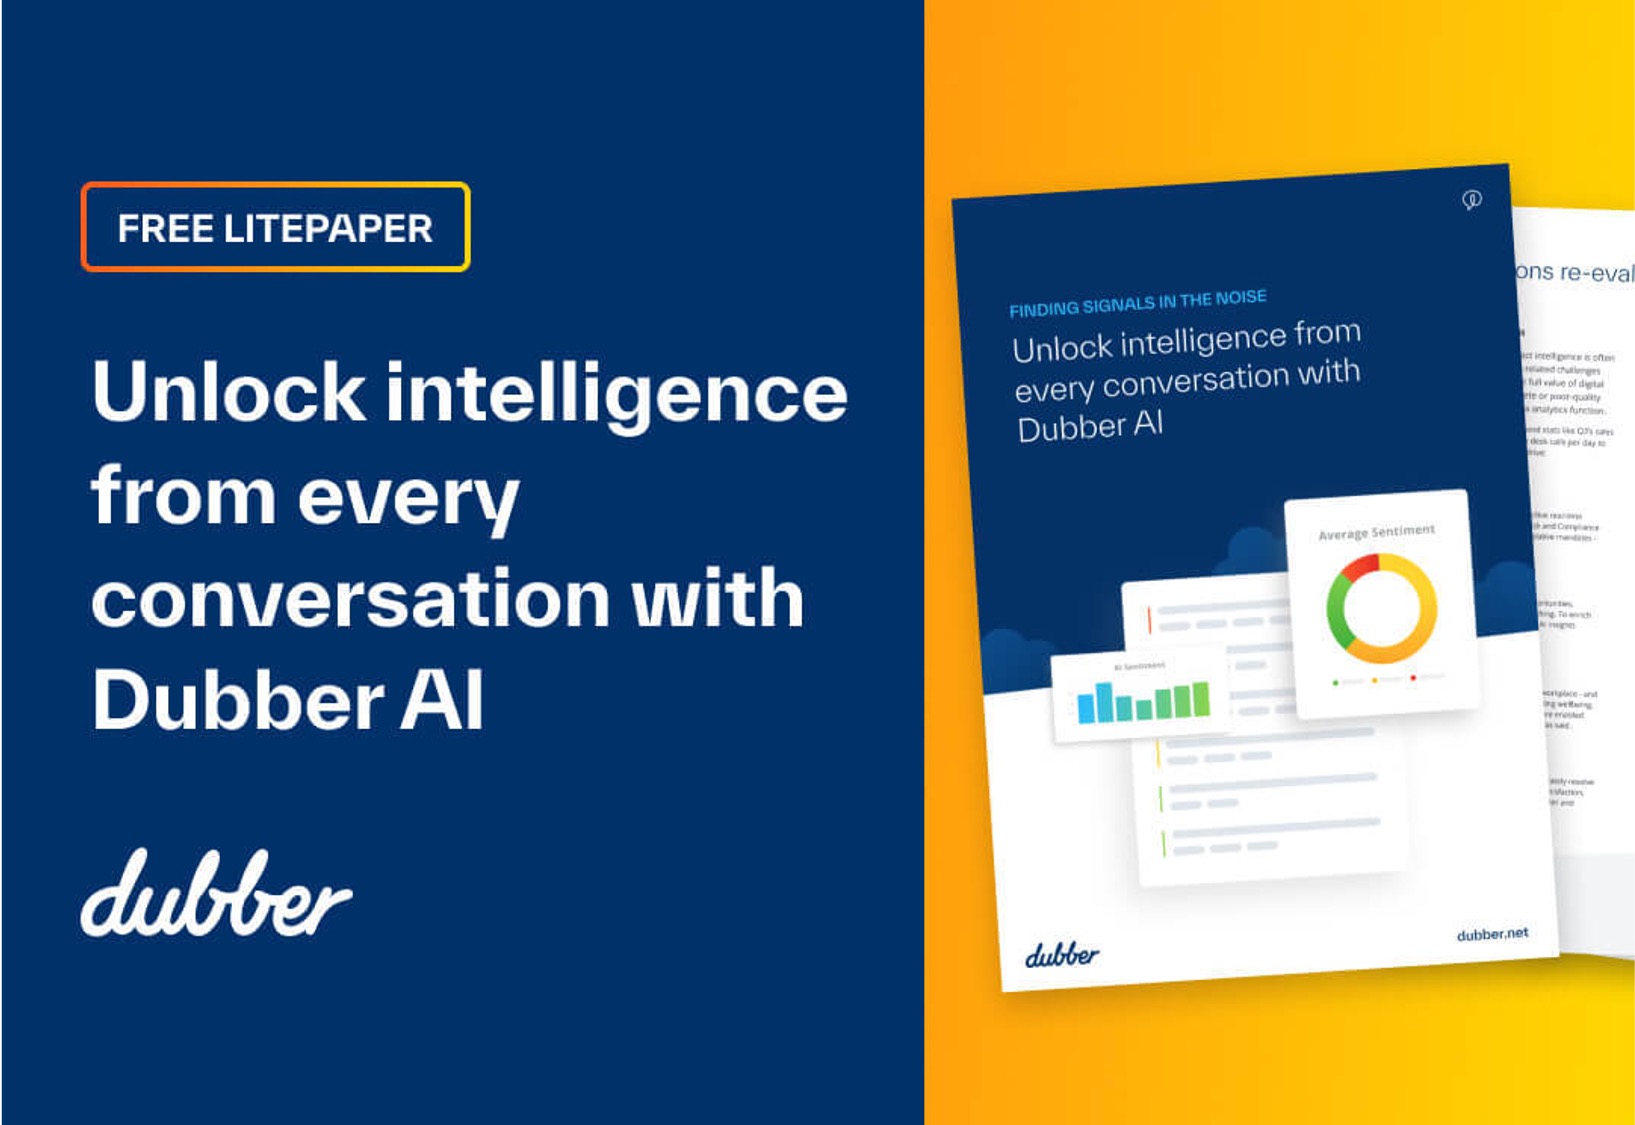 Unlock intelligence from every conversation with Dubber AI